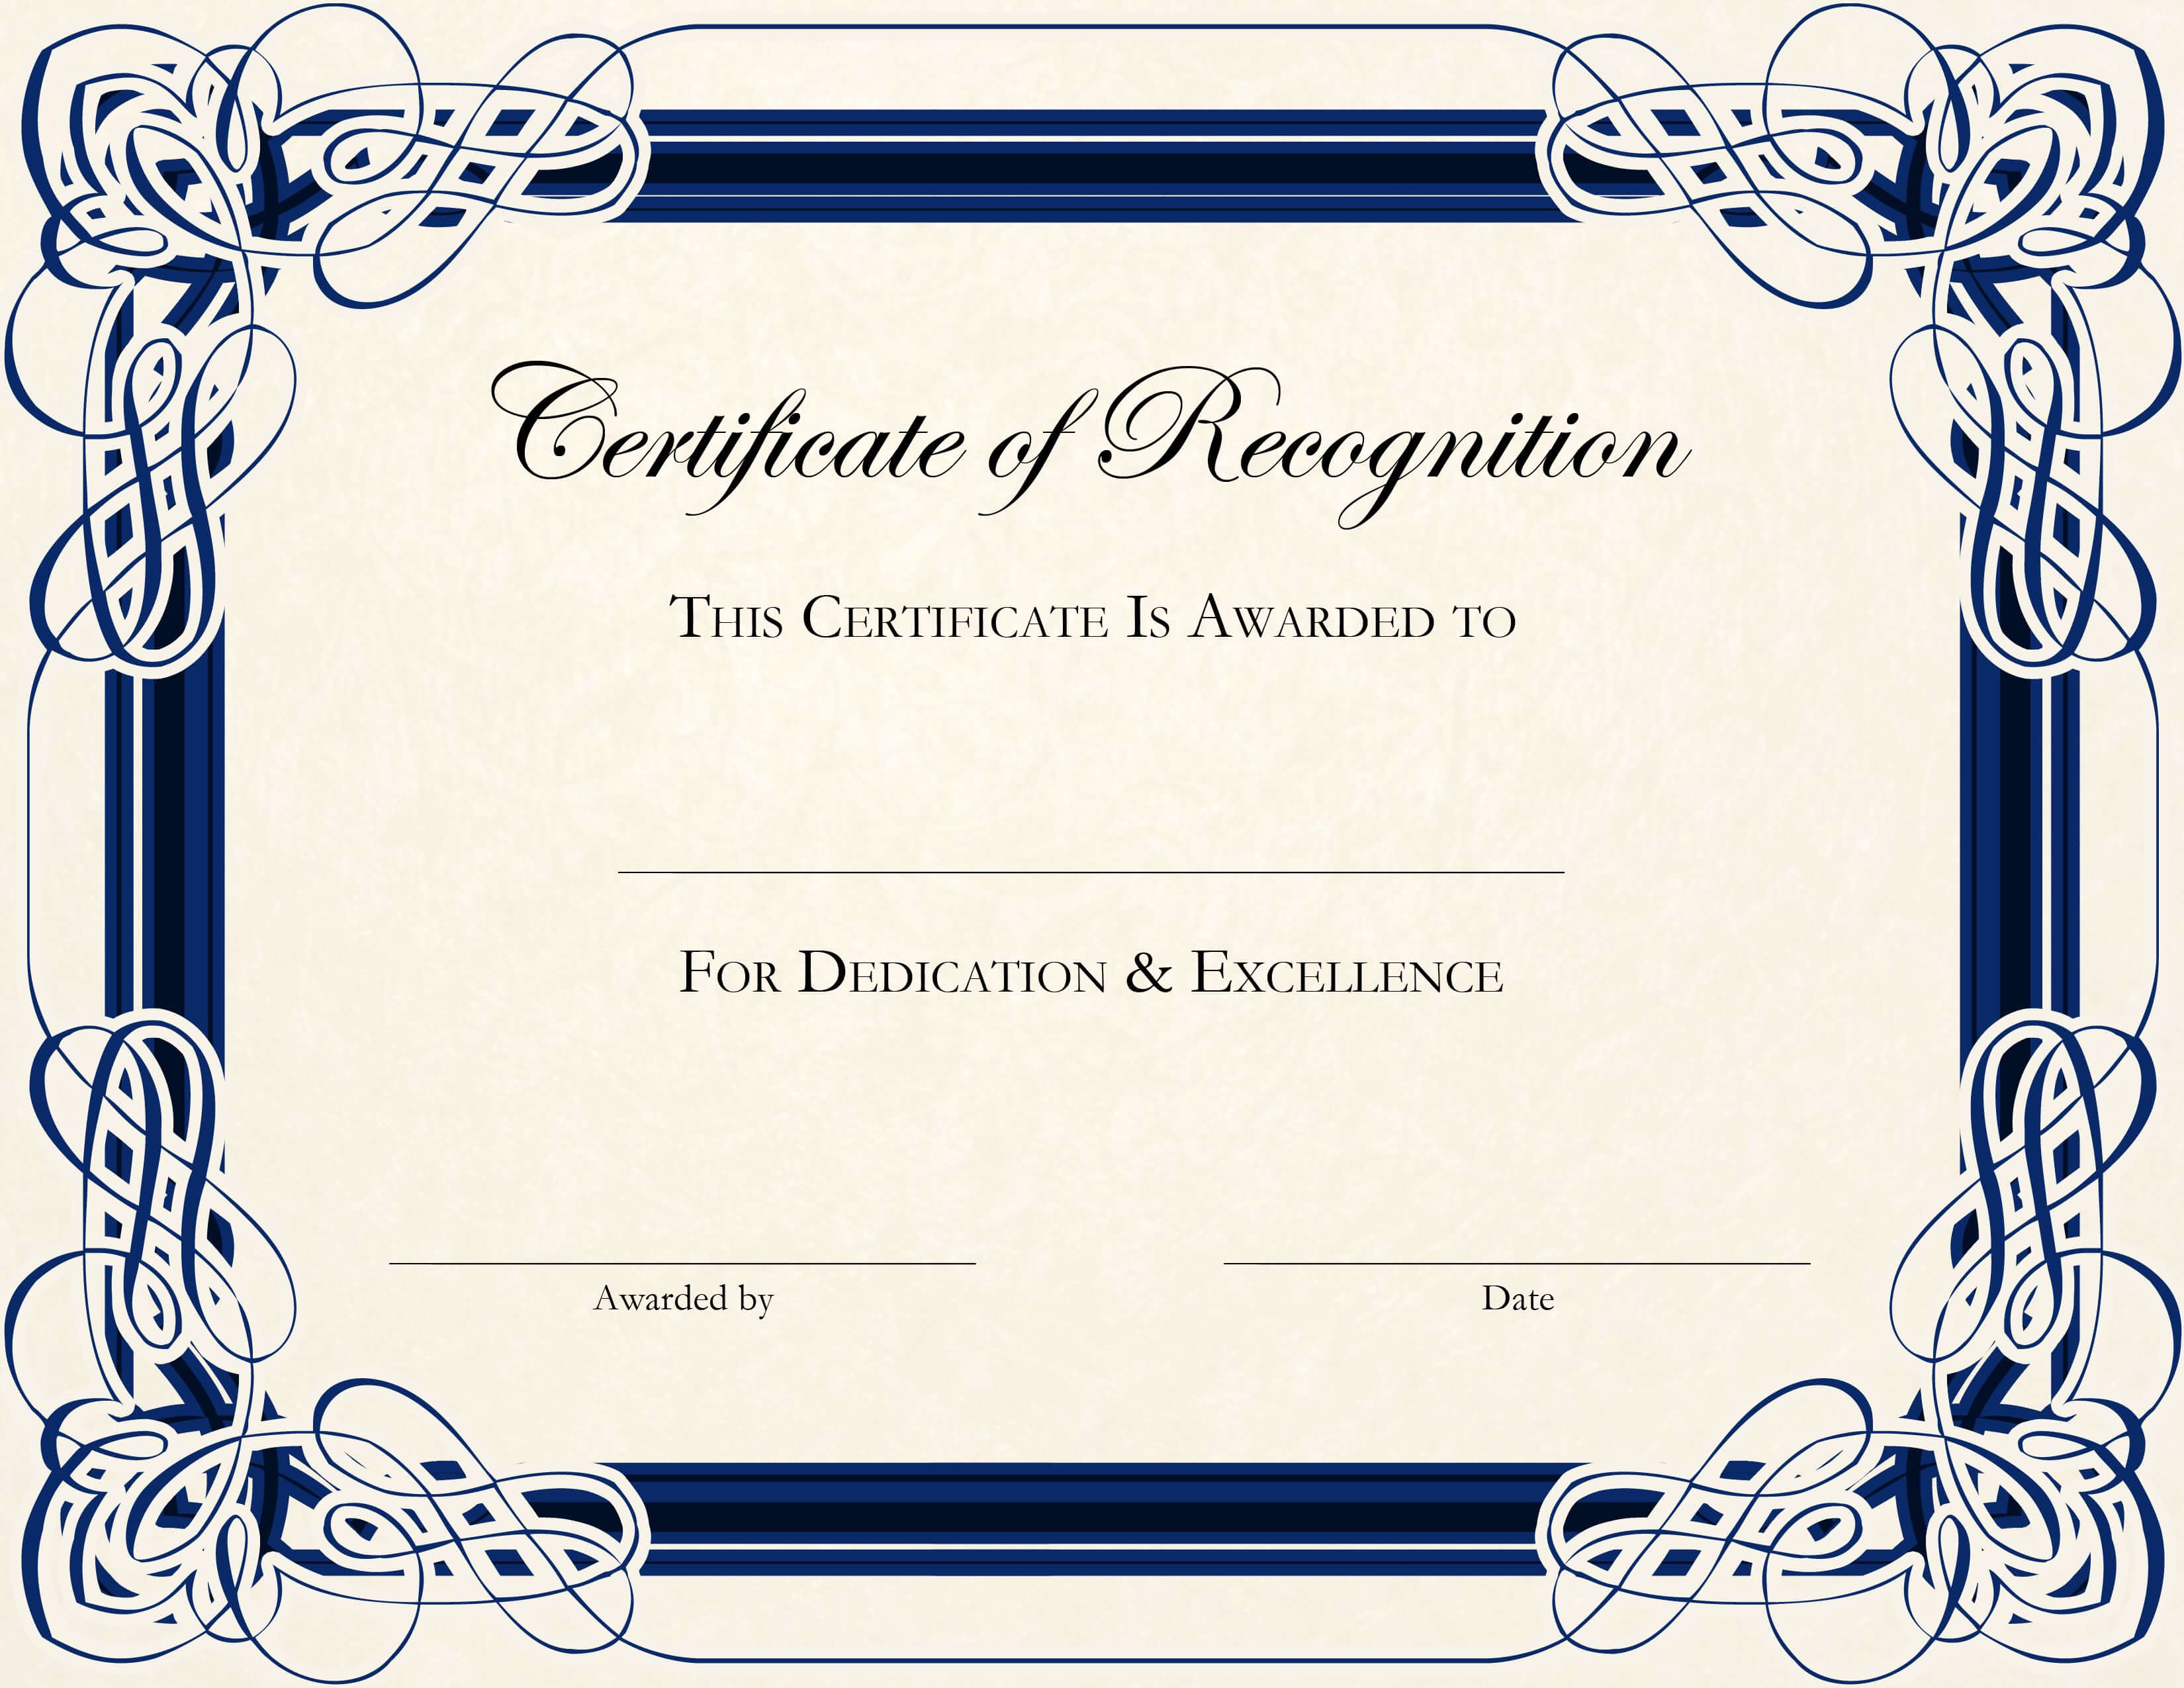 Pinsuzanne Poliner On Lenny | Free Printable Certificate Within Sample Certificate Of Recognition Template